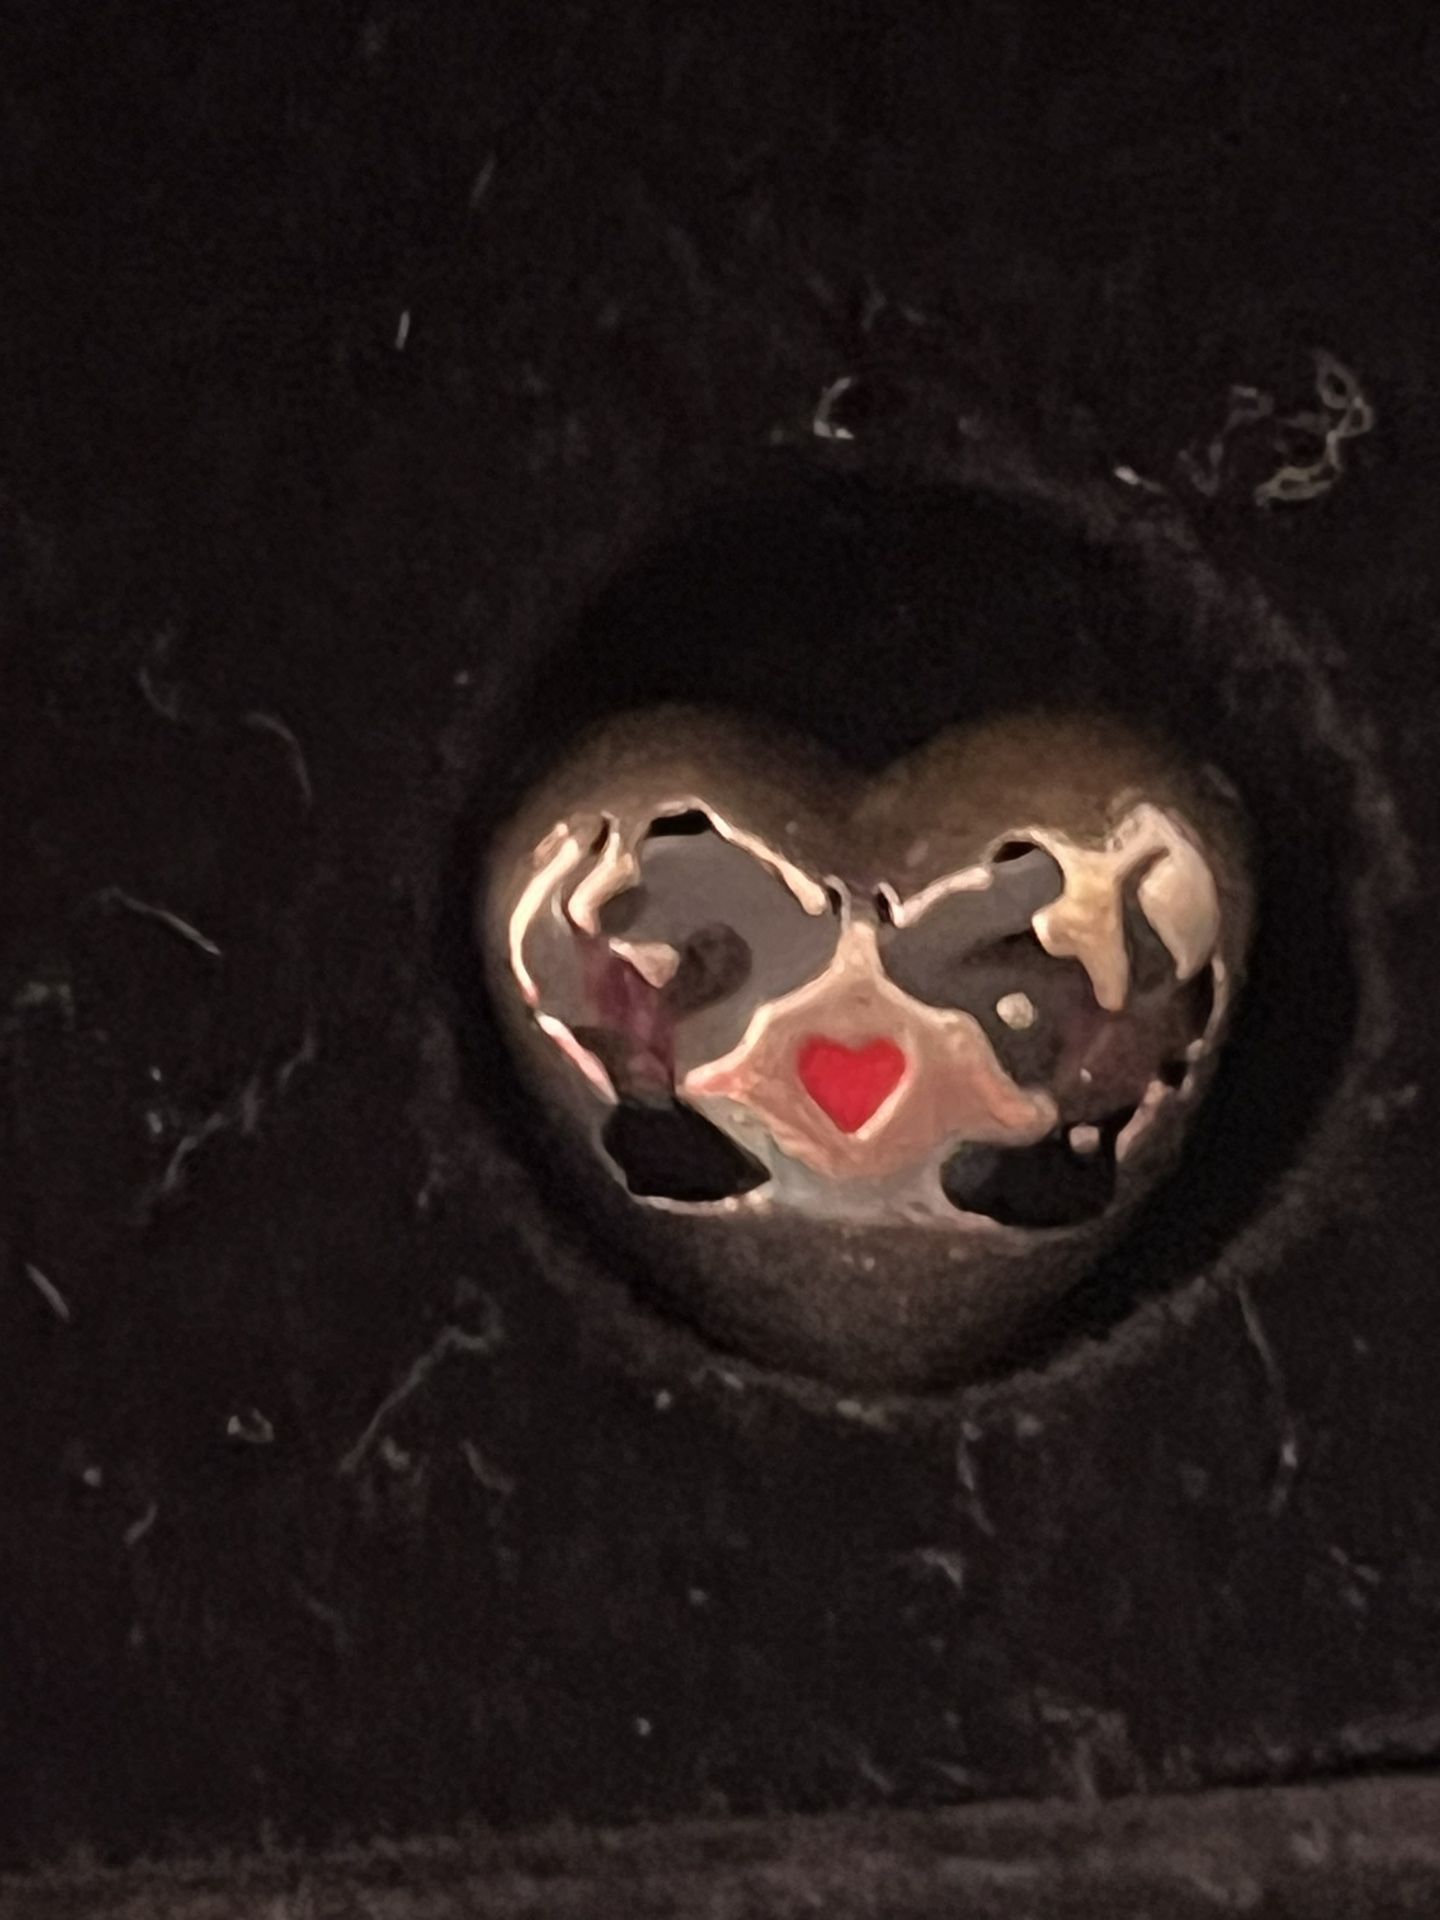 Authentic Pandora Mickey And Minnie “Believe In Magic” Heart Charm. $25.00